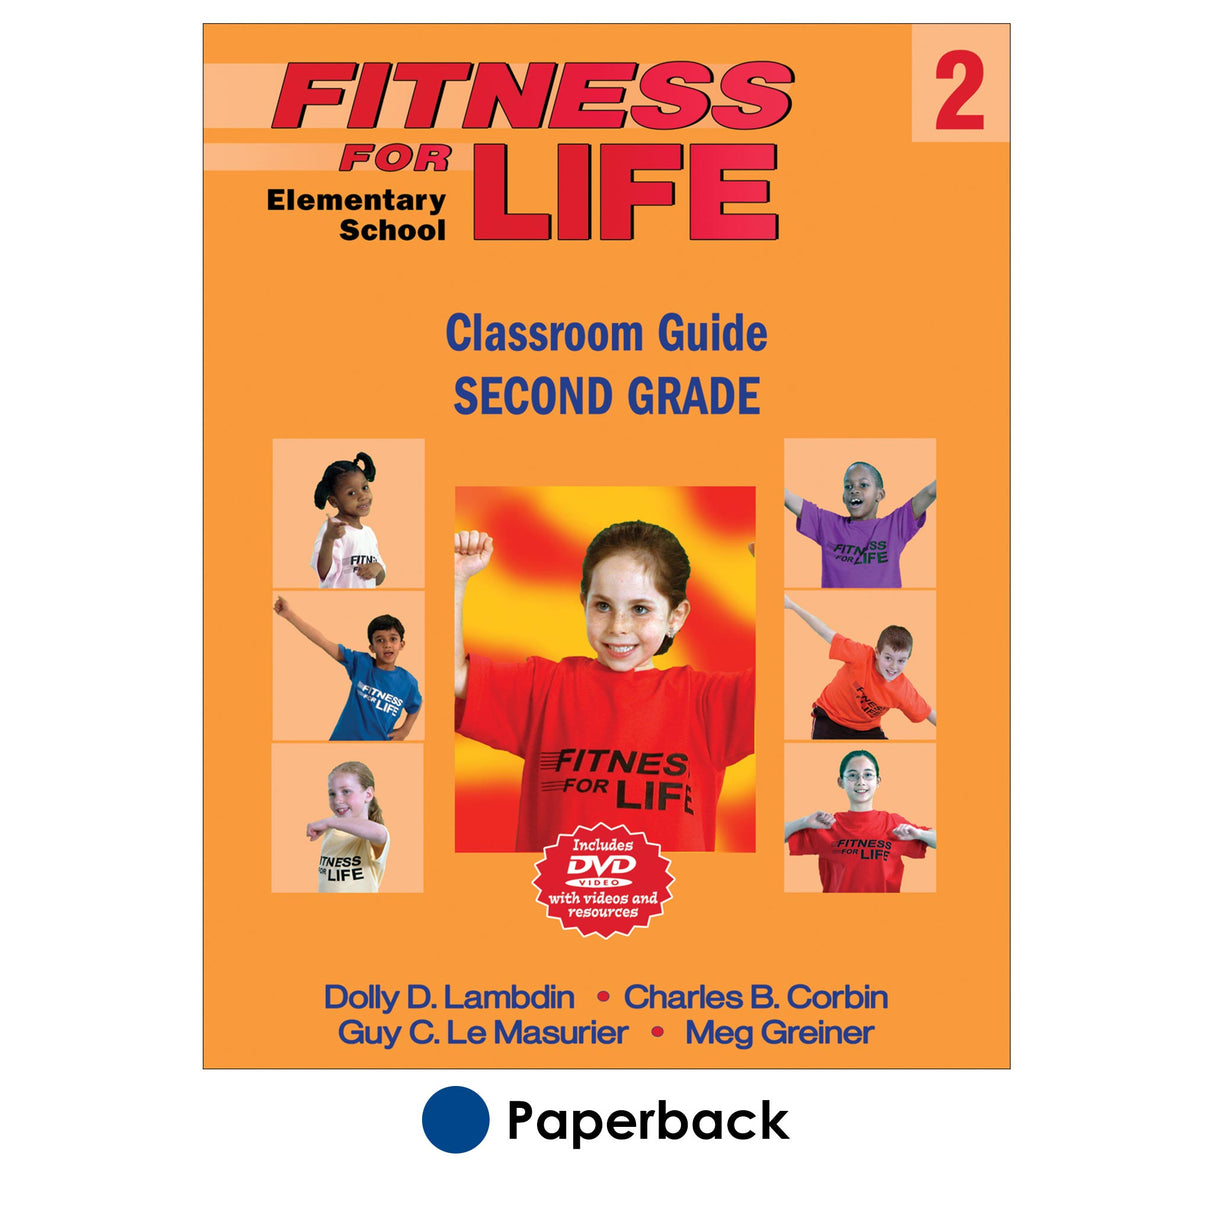 Fitness for Life Elementary School Classroom Guide: Second Grade